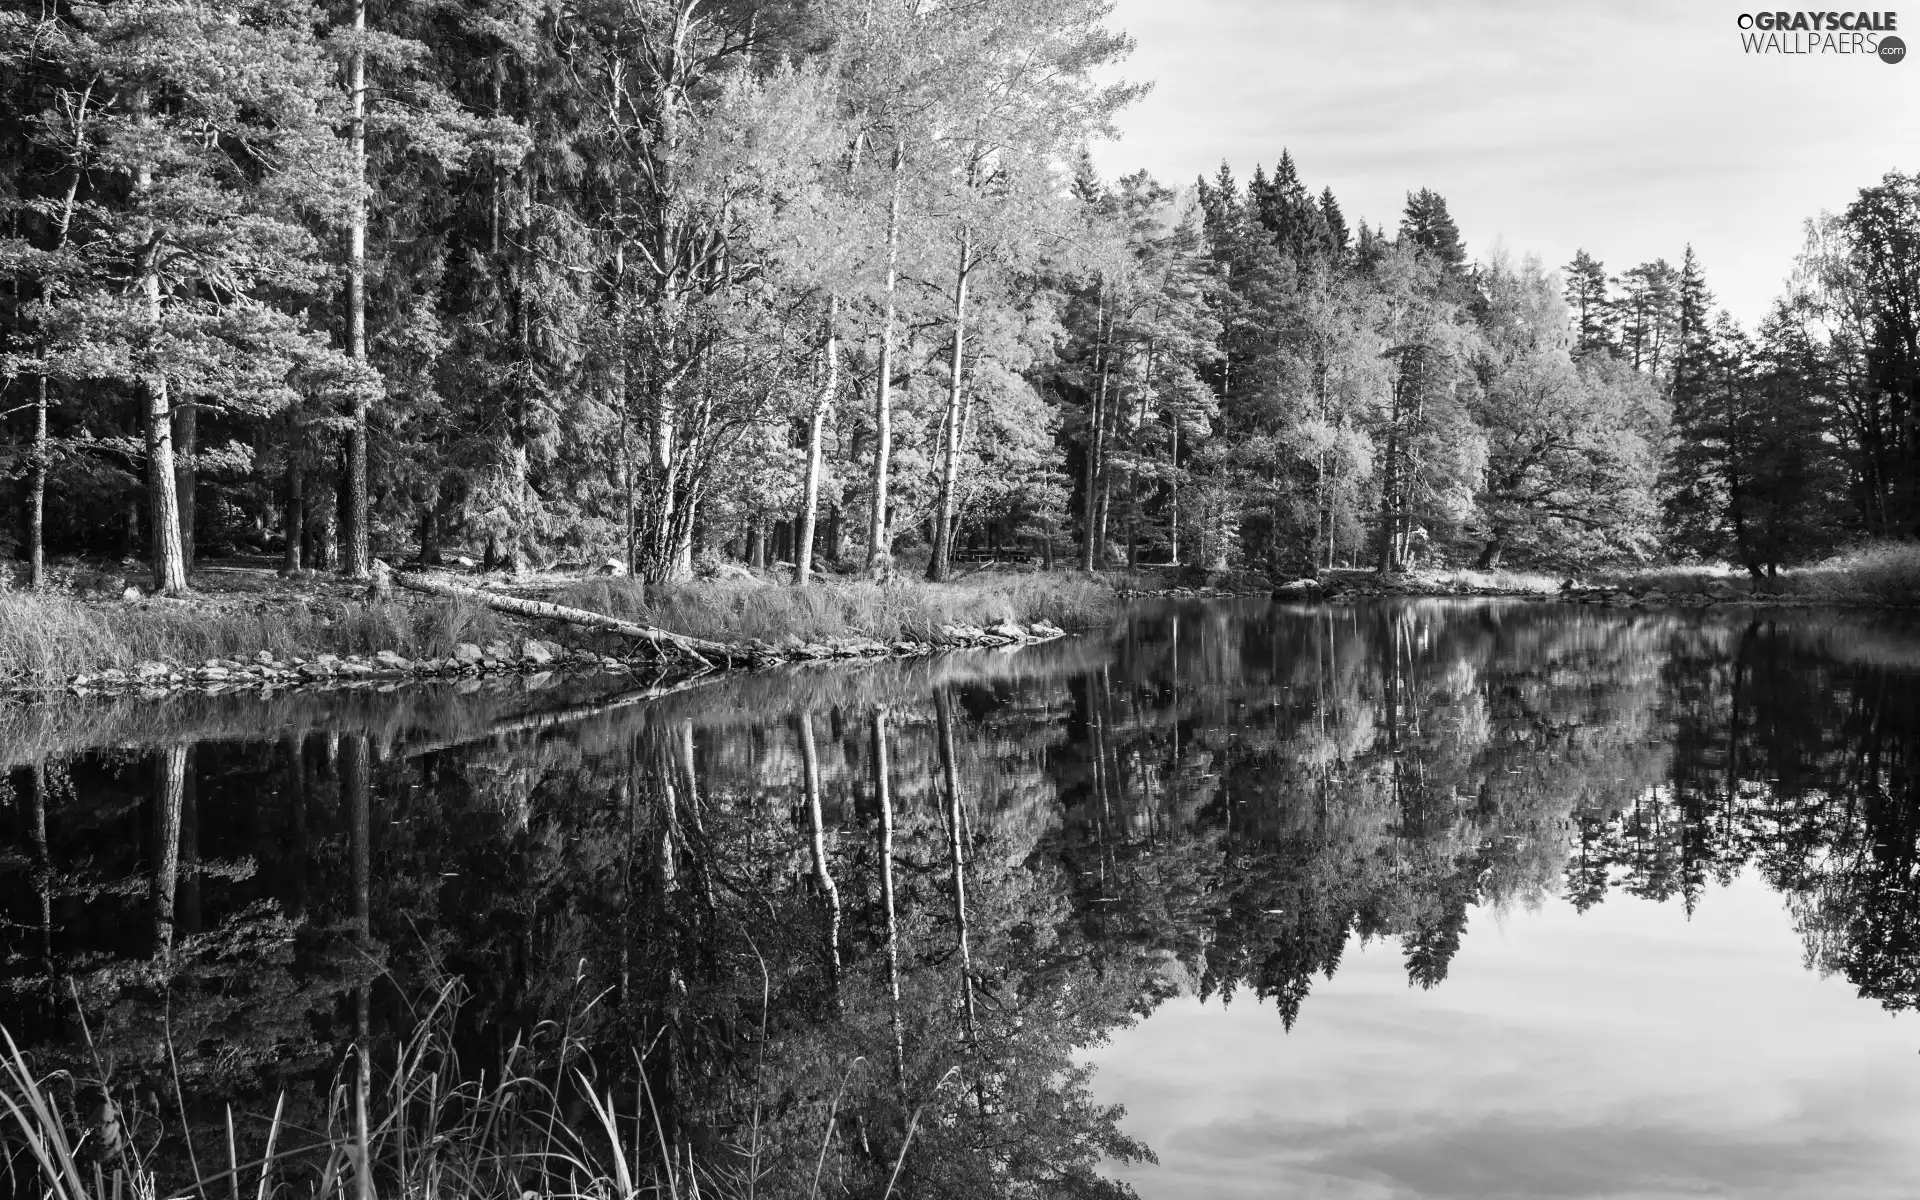 viewes, forest, reflection, autumn, lake, trees